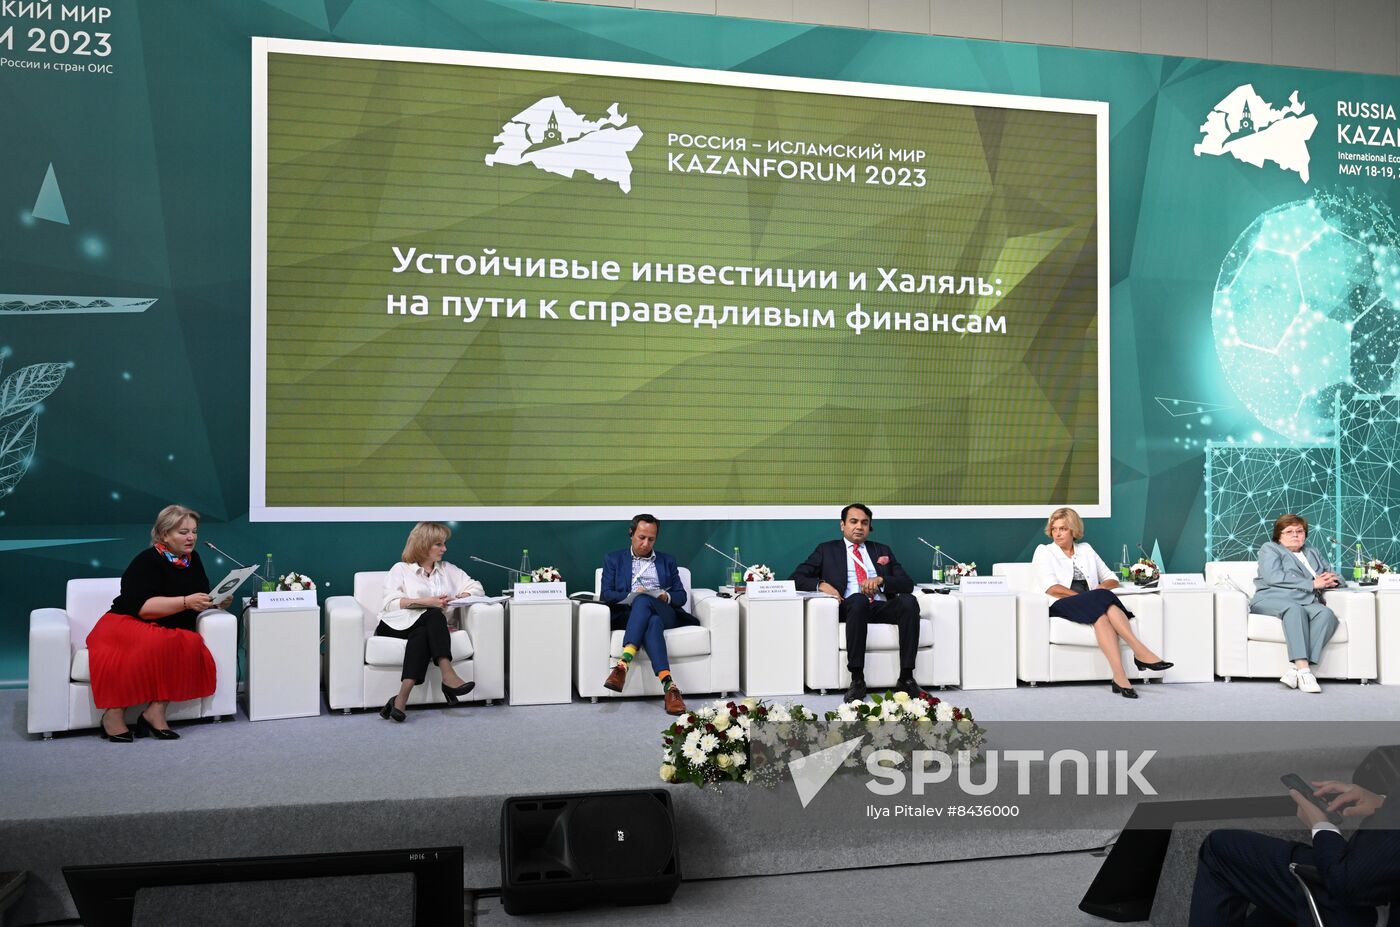 KAZANFORUM 2023. Sustainable investments and Halal: On the road to fair finance